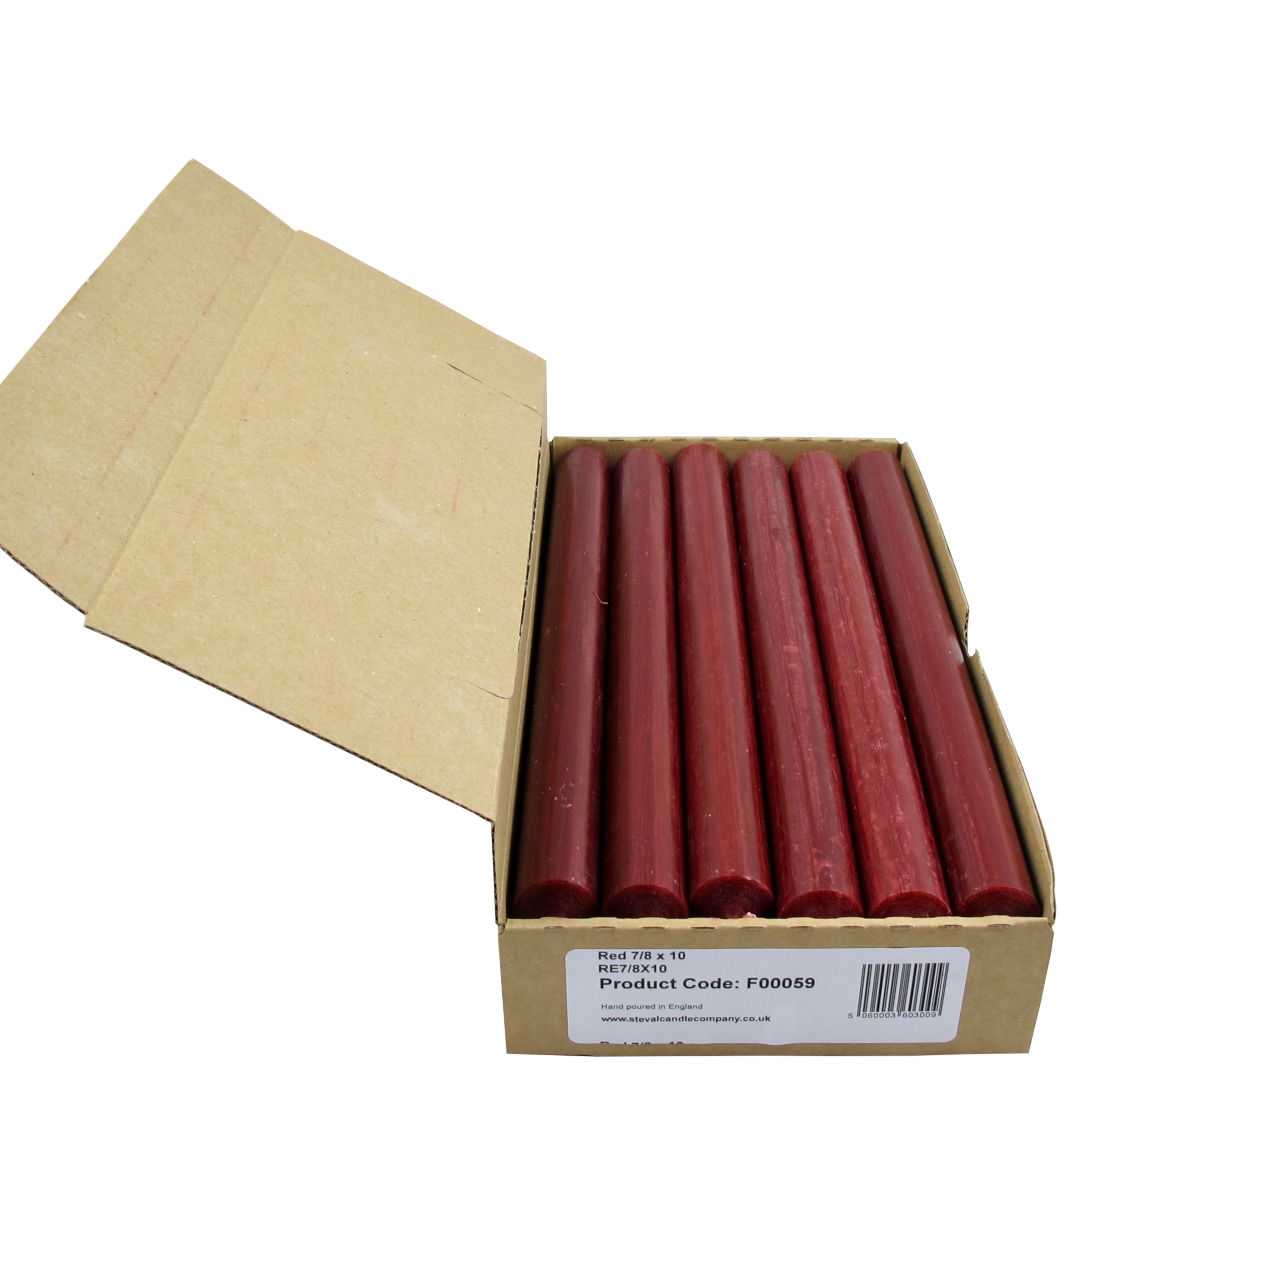 st-eval-candle-company-box-of-12-red-dinner-candles